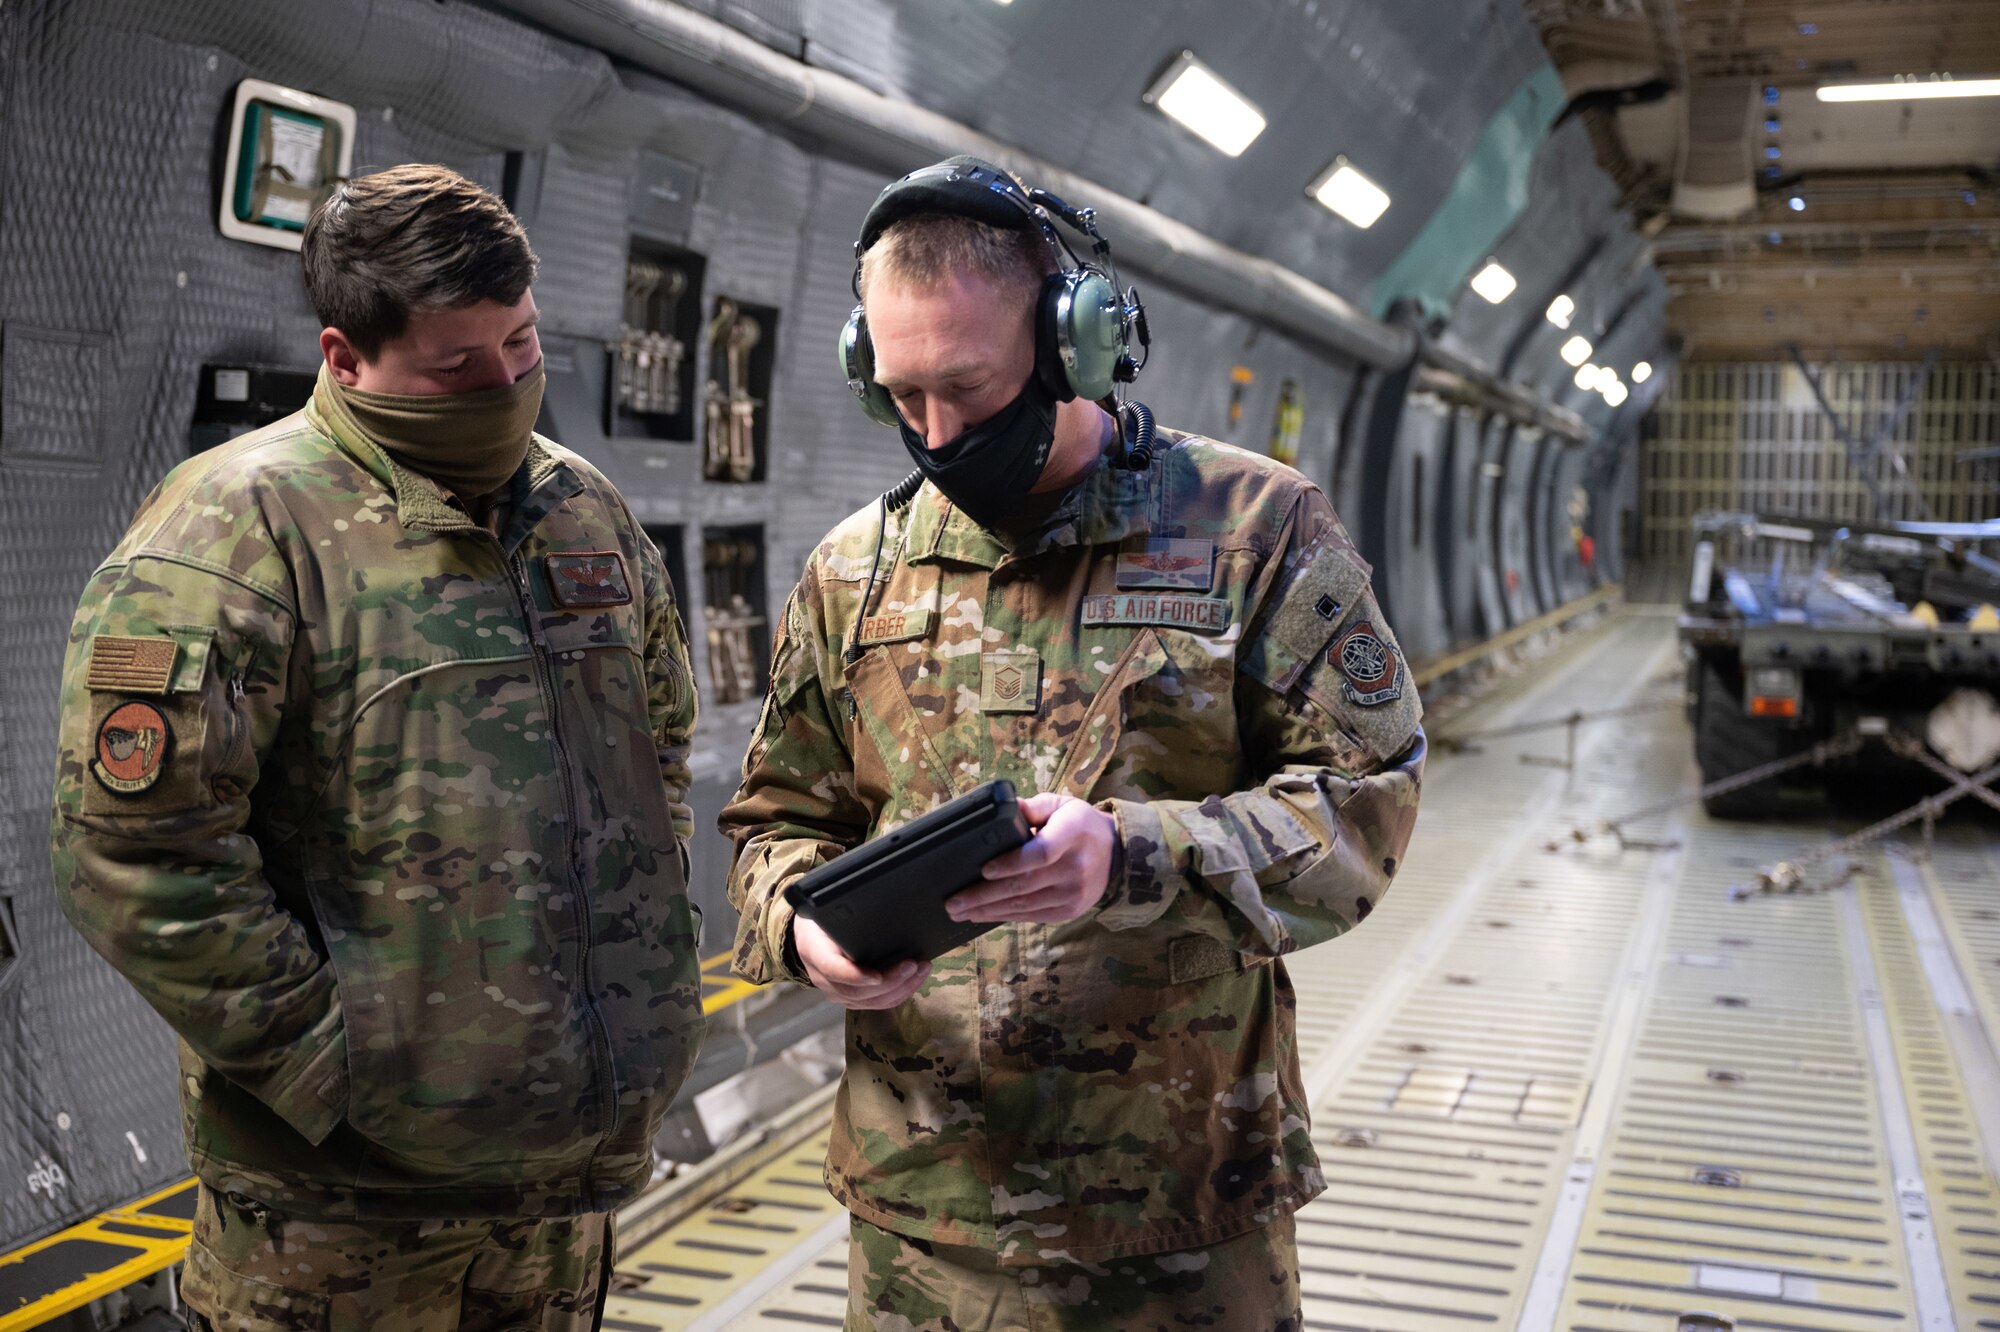 Master Sgt. Daniel Garber, 9th Airlift Squadron loadmaster, reviews a preflight checklist with Staff Sgt. Jesse Garza, 9th AS loadmaster, on a C-5M Super Galaxy at Dover Air Force Base, Delaware, Jan. 19, 2021. The 9th AS, also known as the “Proud Pelicans,” routinely flies local training missions to maintain operational readiness in support of the nation’s outsized global airlift capability. (U.S. Air Force photo by Airman 1st Class Faith Schaefer)